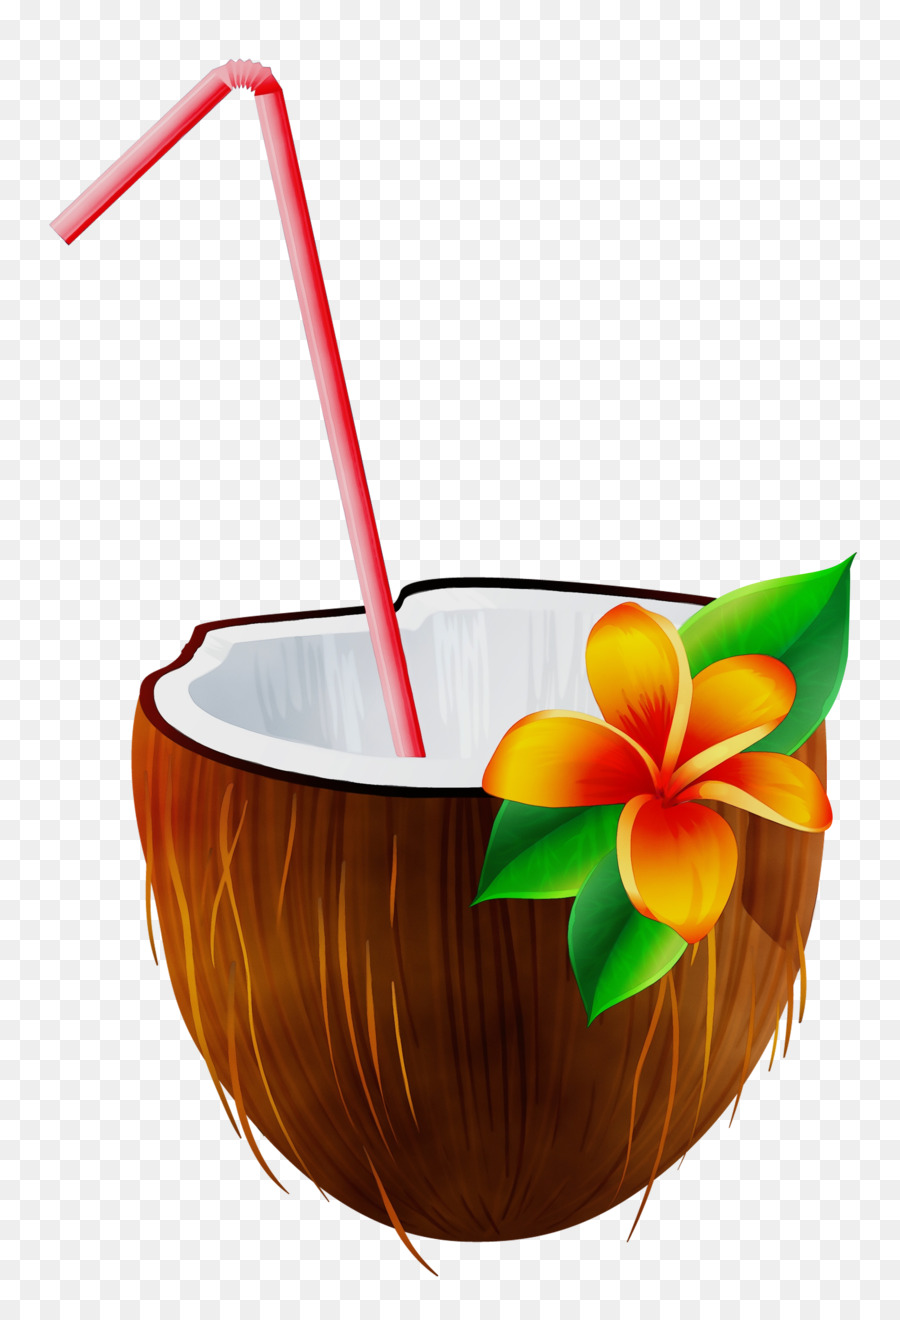 tiki clipart coconut water